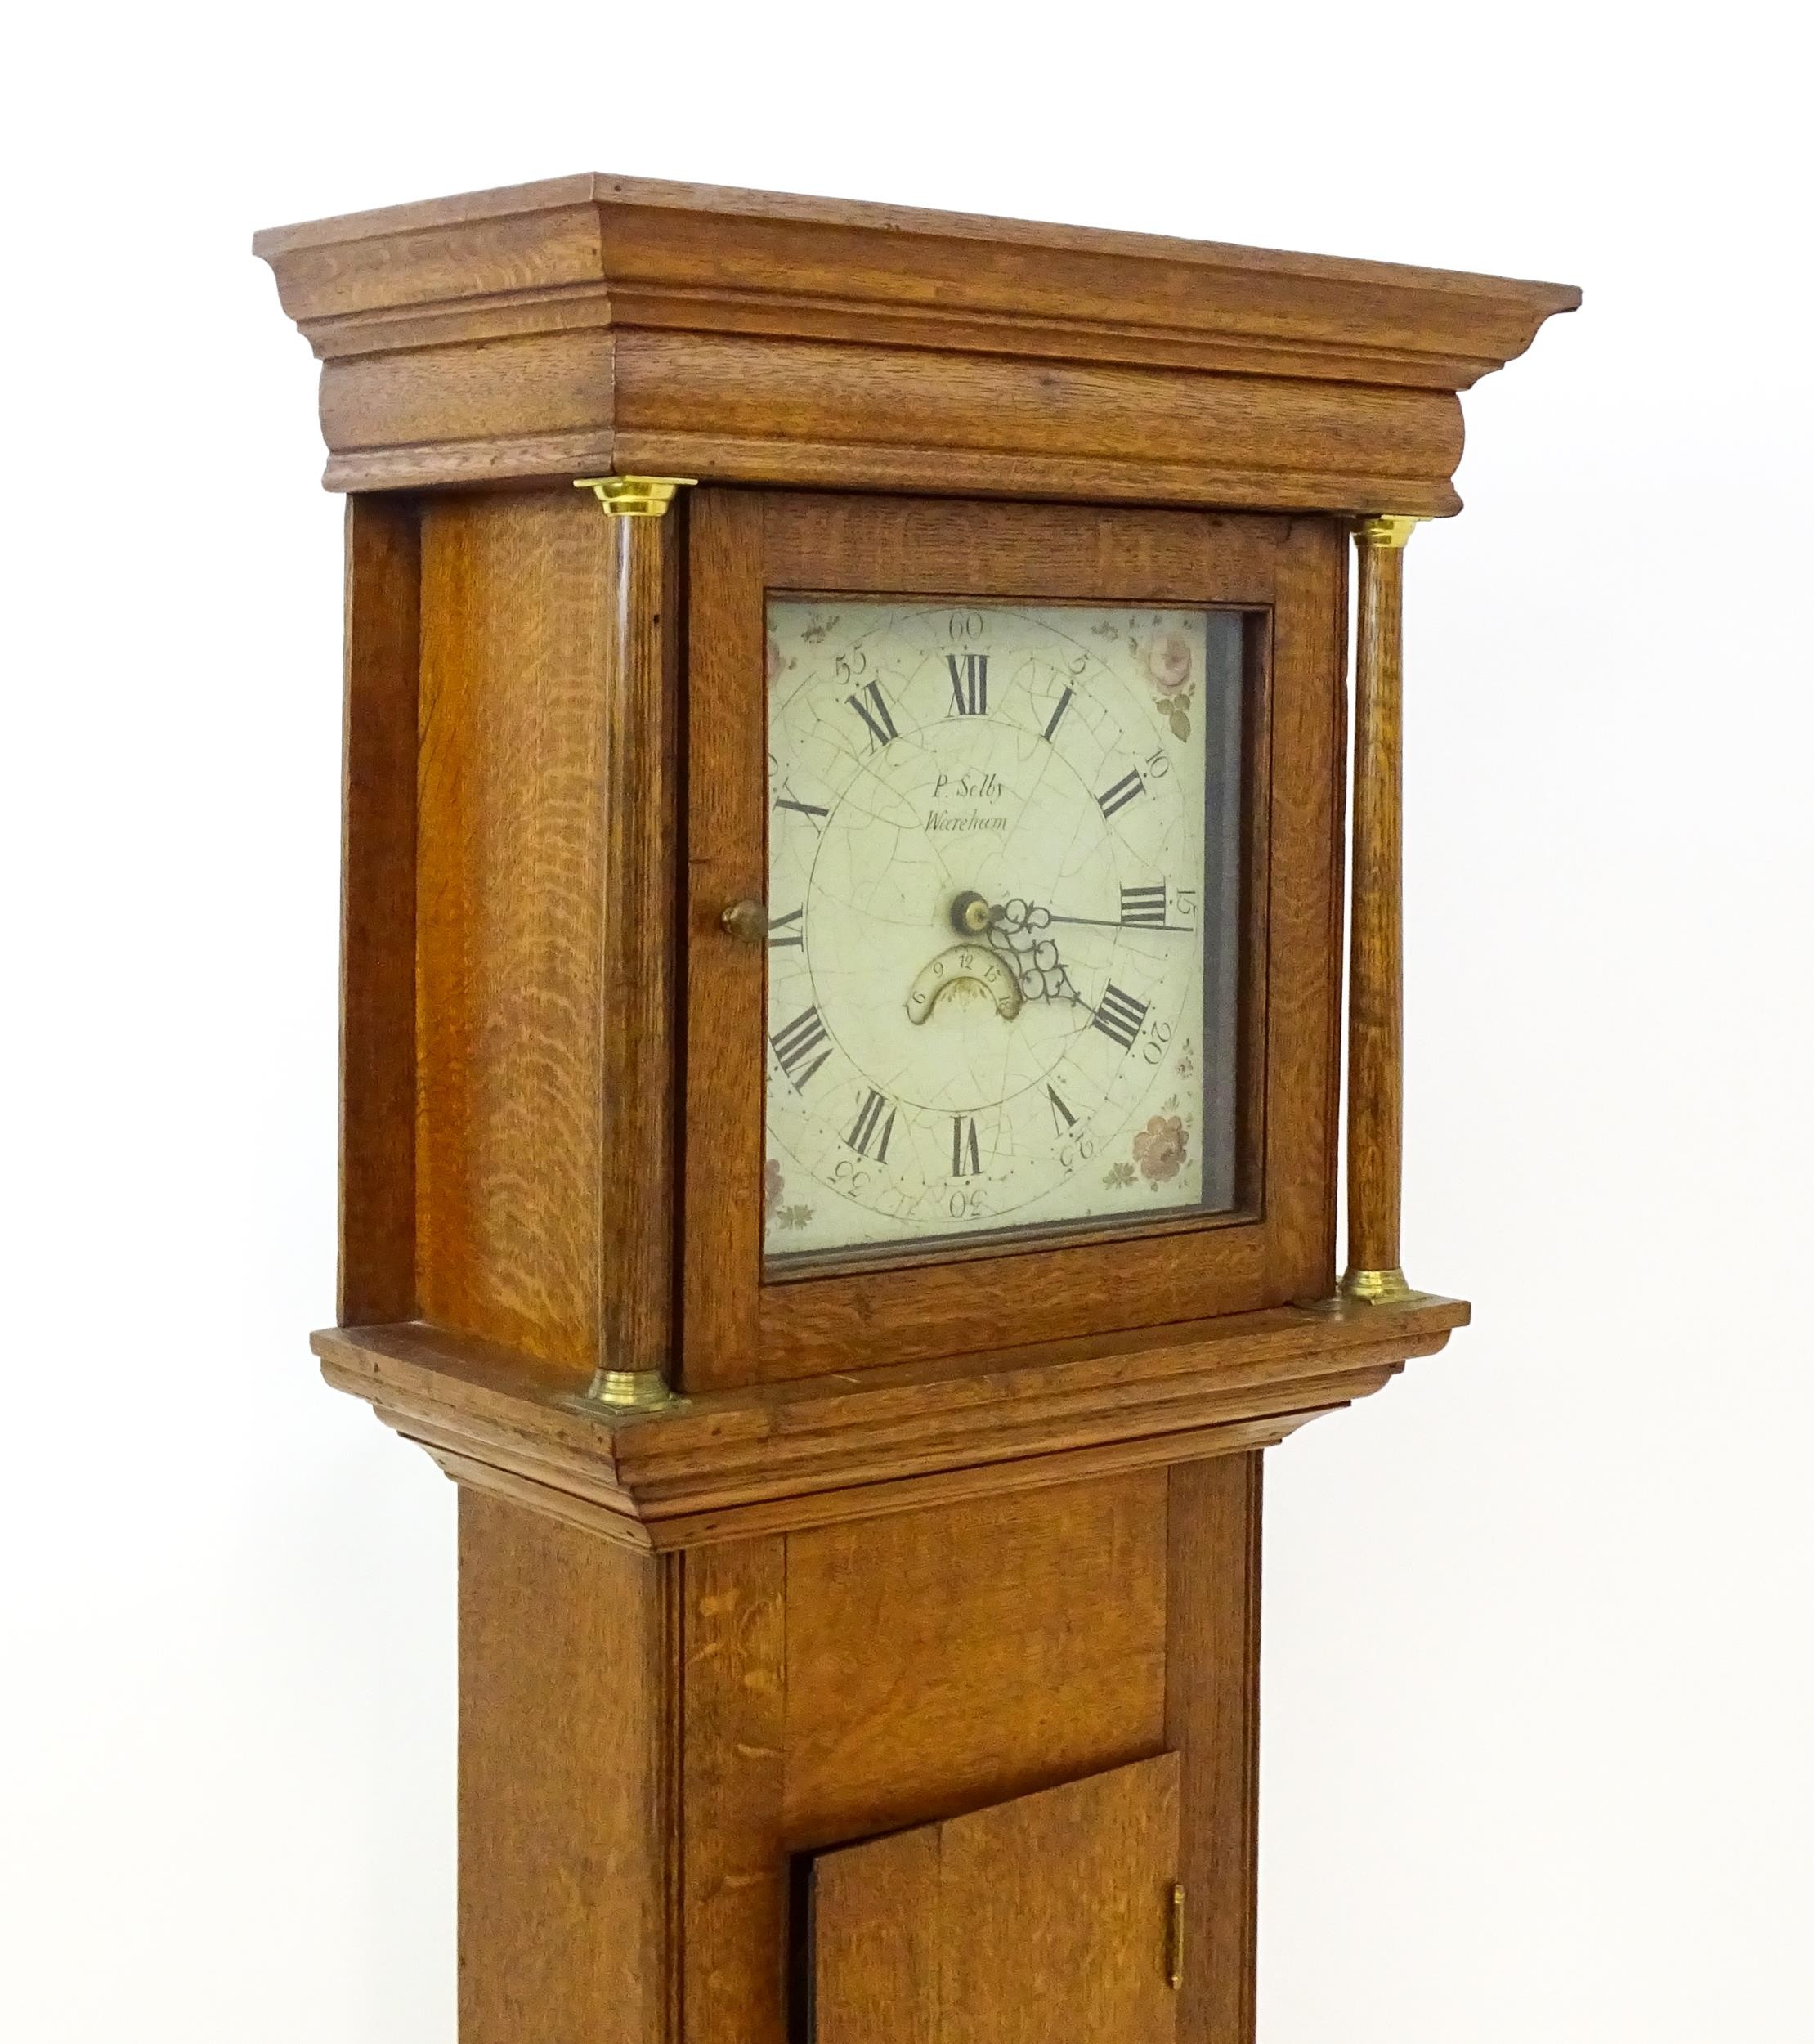 P Selby Wareham - Dorset : A late 18thC oak cased 30 hour longcase clock, the painted dial signed P. - Image 12 of 12